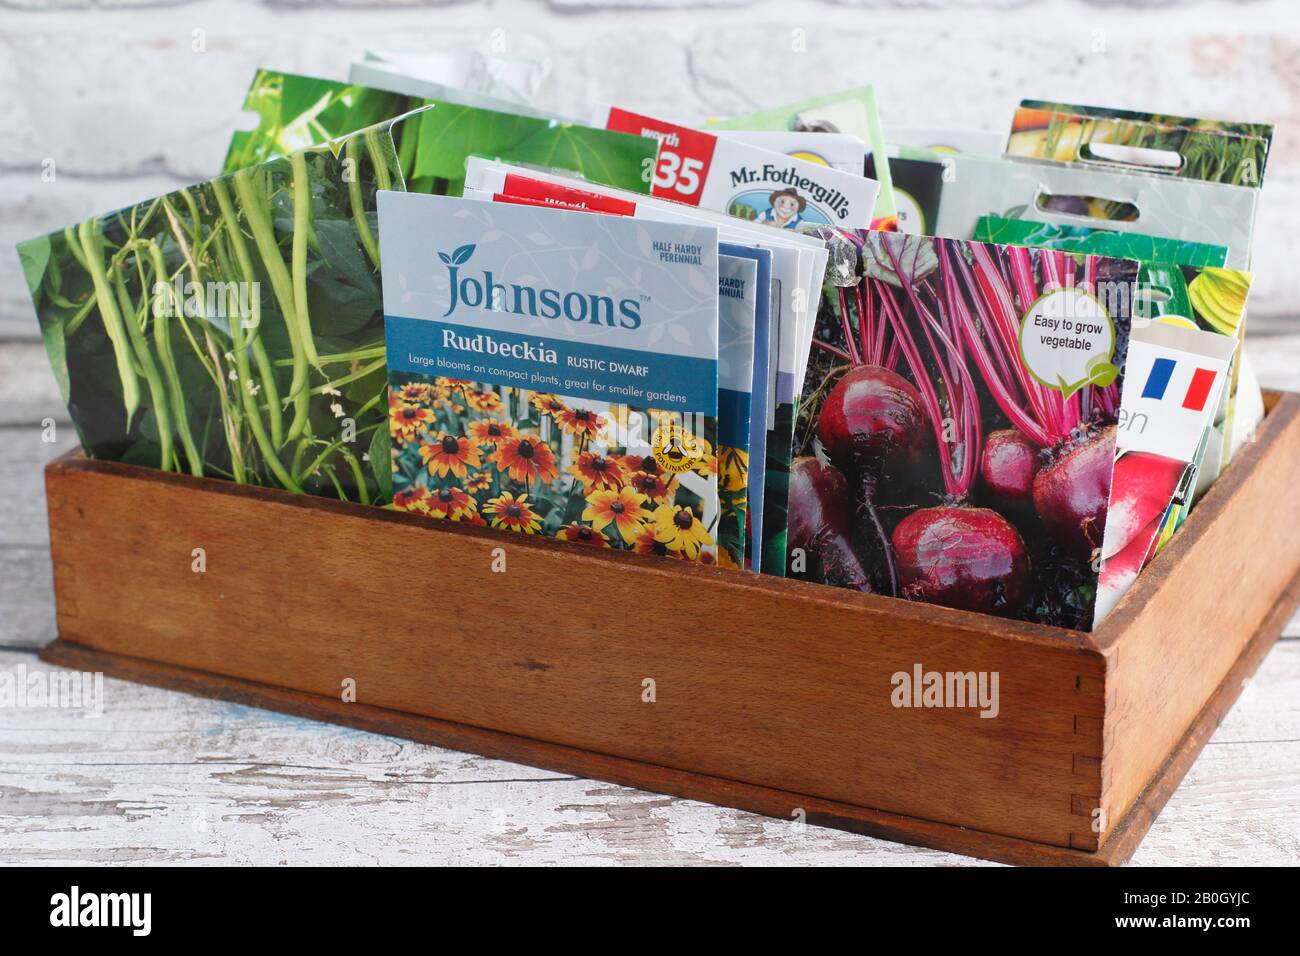 Vegetable and flower seed packets in a wooden box. UK Stock Photo